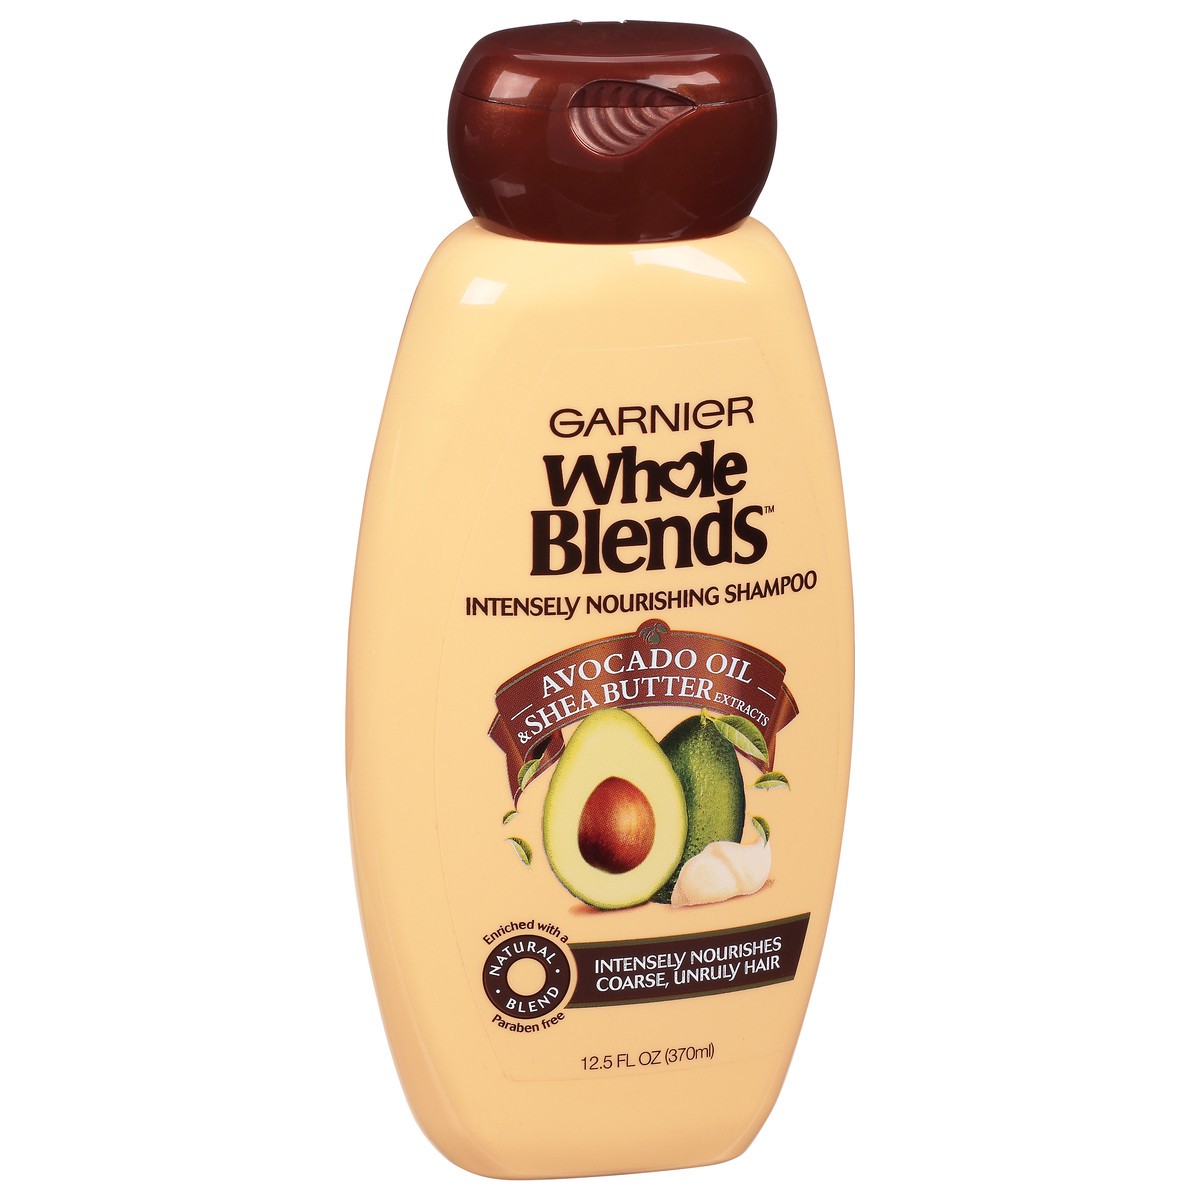 slide 7 of 10, Whole Blends Intensely Nourishing Avocado Oil & Shea Butter Extracts Shampoo 12.5 fl oz, 12.5 fl oz